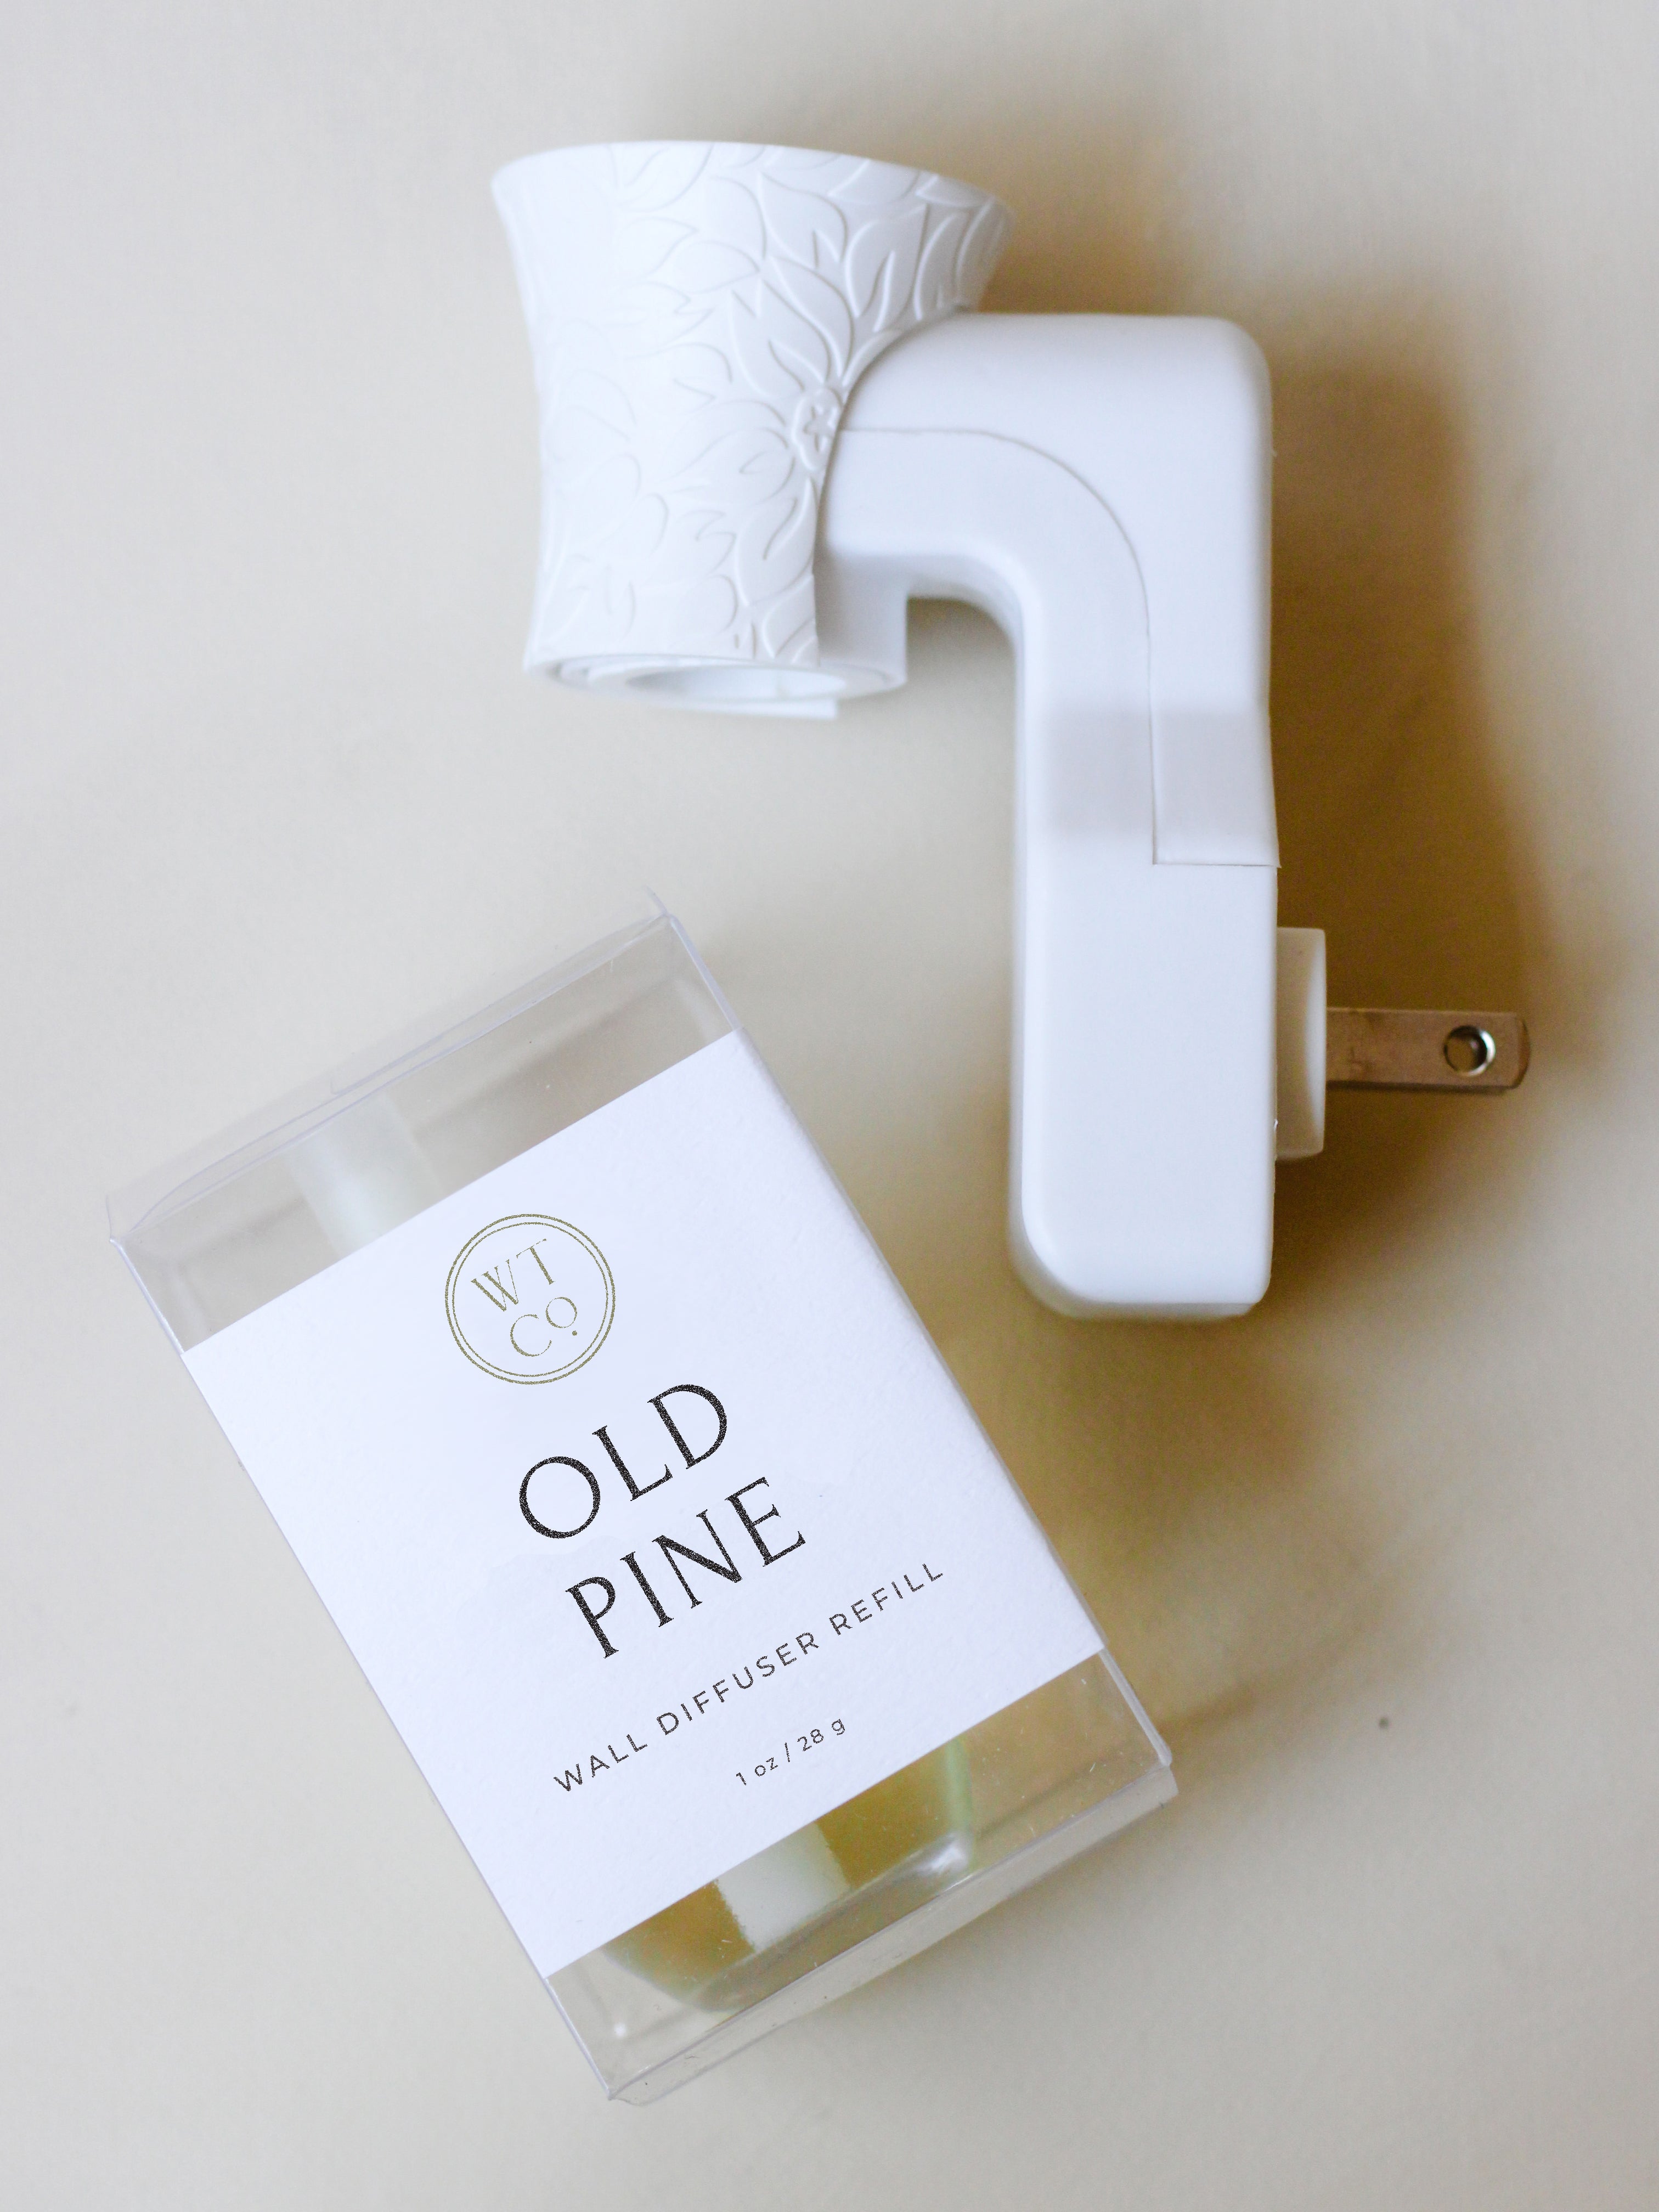 Old Pine Wall Diffuser Refill | Well-Taylored Co.